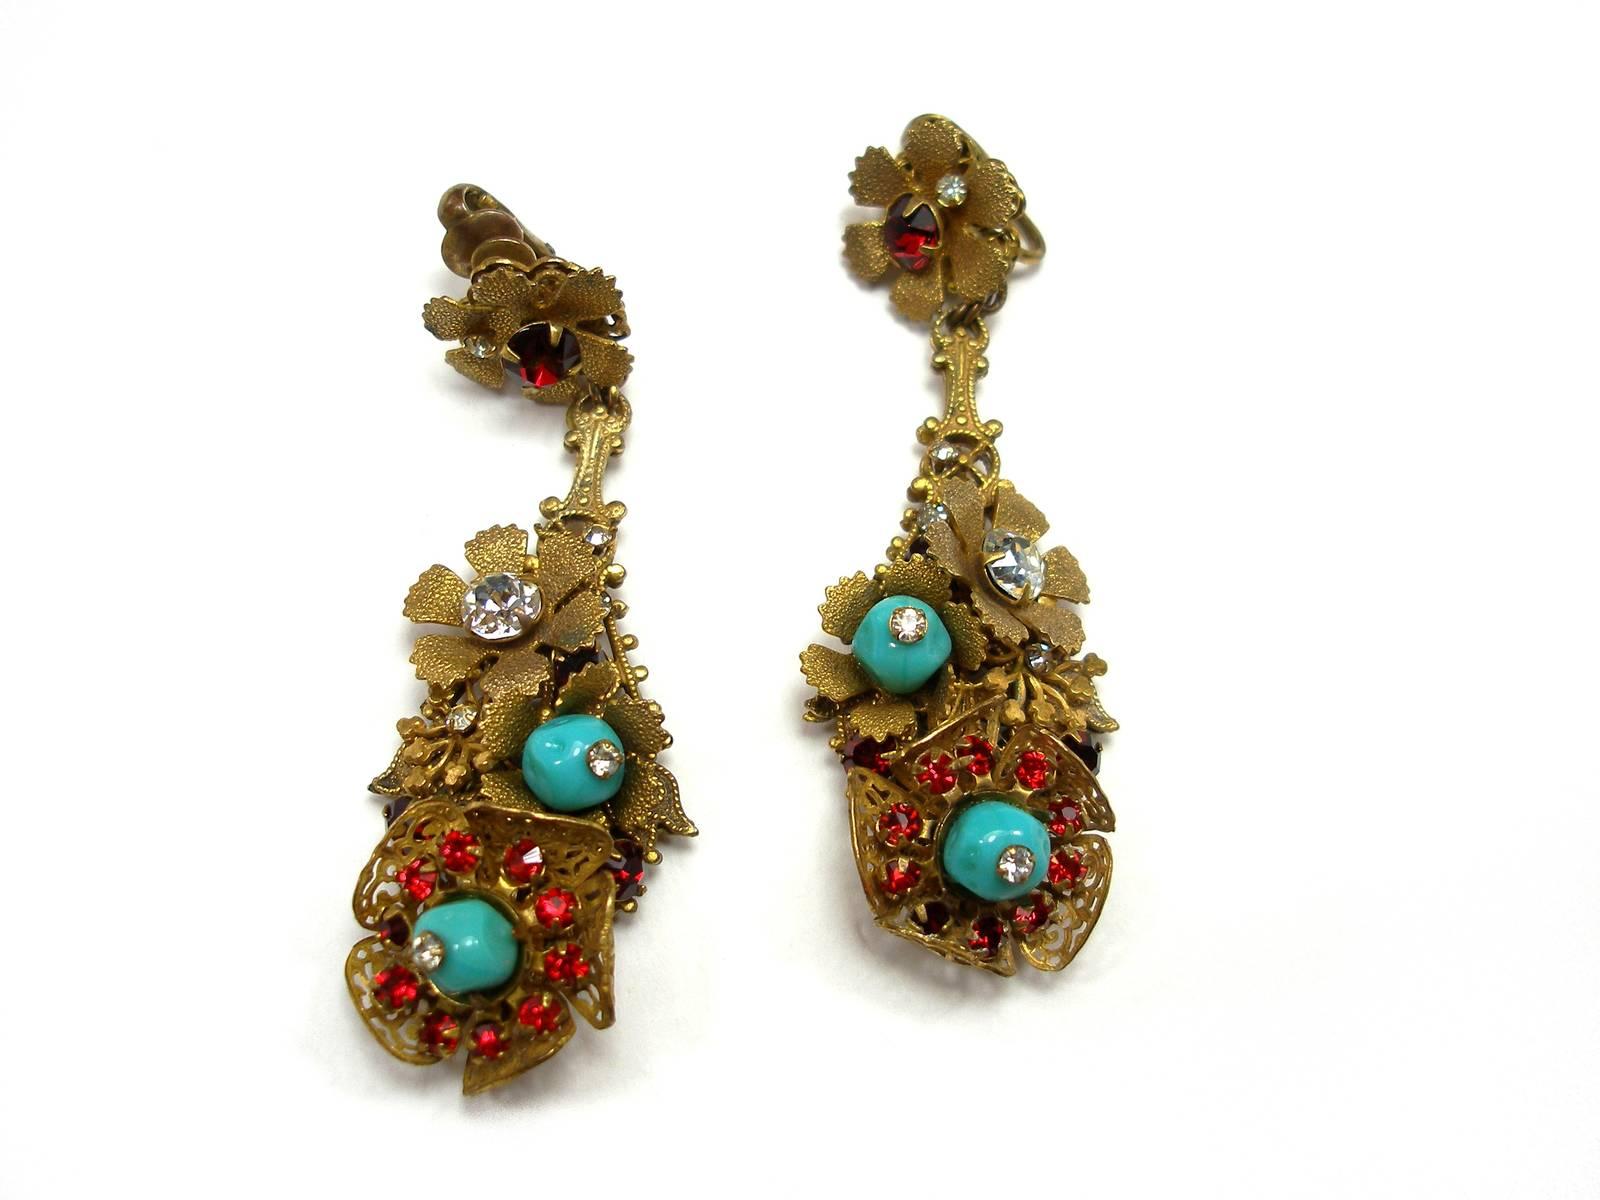 Absoluty Collectible Item
Vintage 50'S Earings
Signed Amourelle for Miriam Haskell & Frank Hess
Size : : height 8 cm or 3.14 